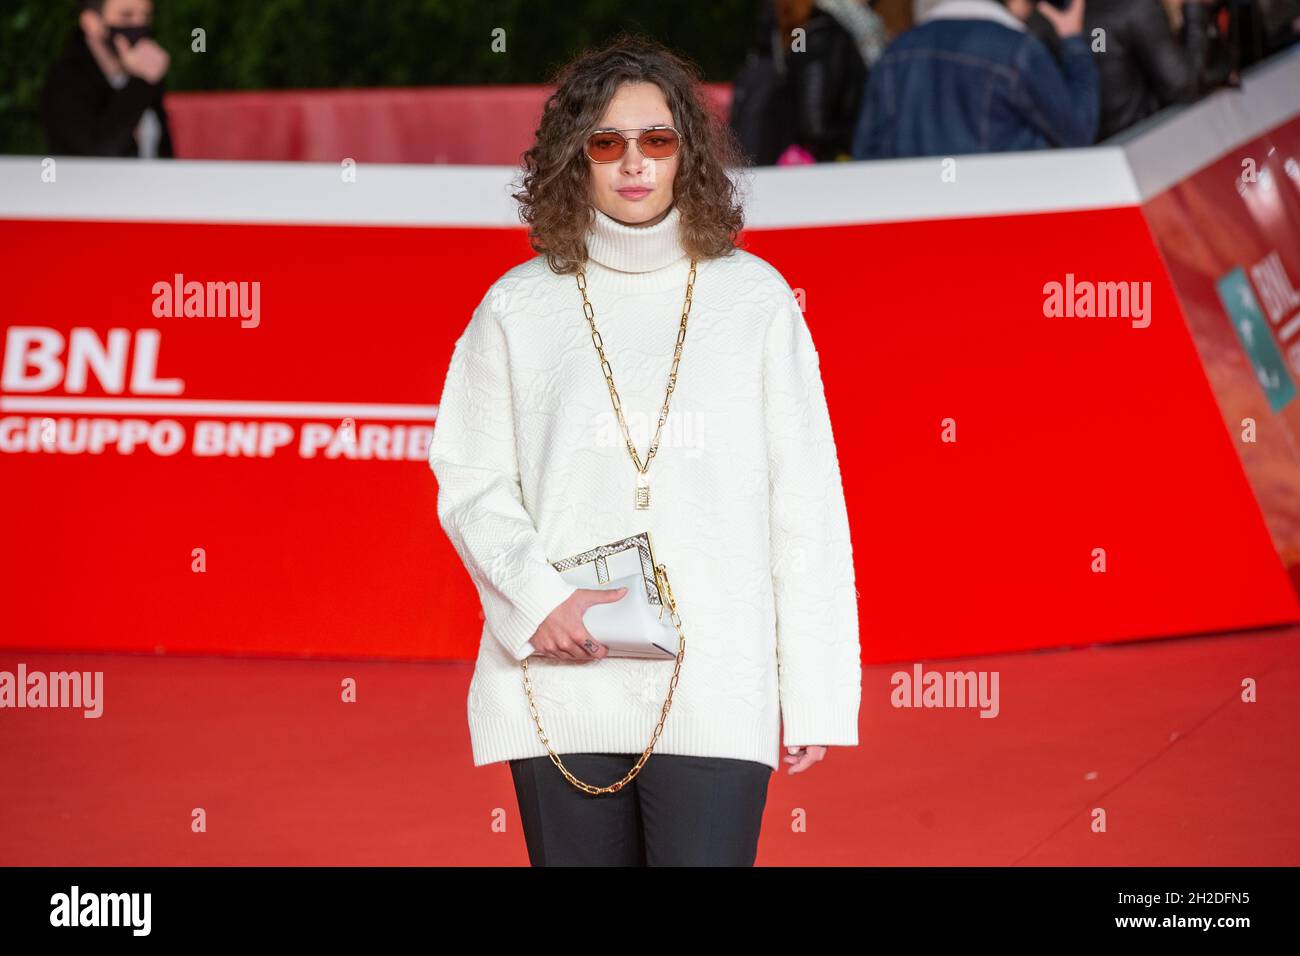 Madame attends red carpet of 'Caterina Caselli – Una vita, cento vite' during 16th Rome Film Fest 2021 on October 20, 2021 (Photo by Matteo Nardone/Pacific Press/Sipa USA) Stock Photo